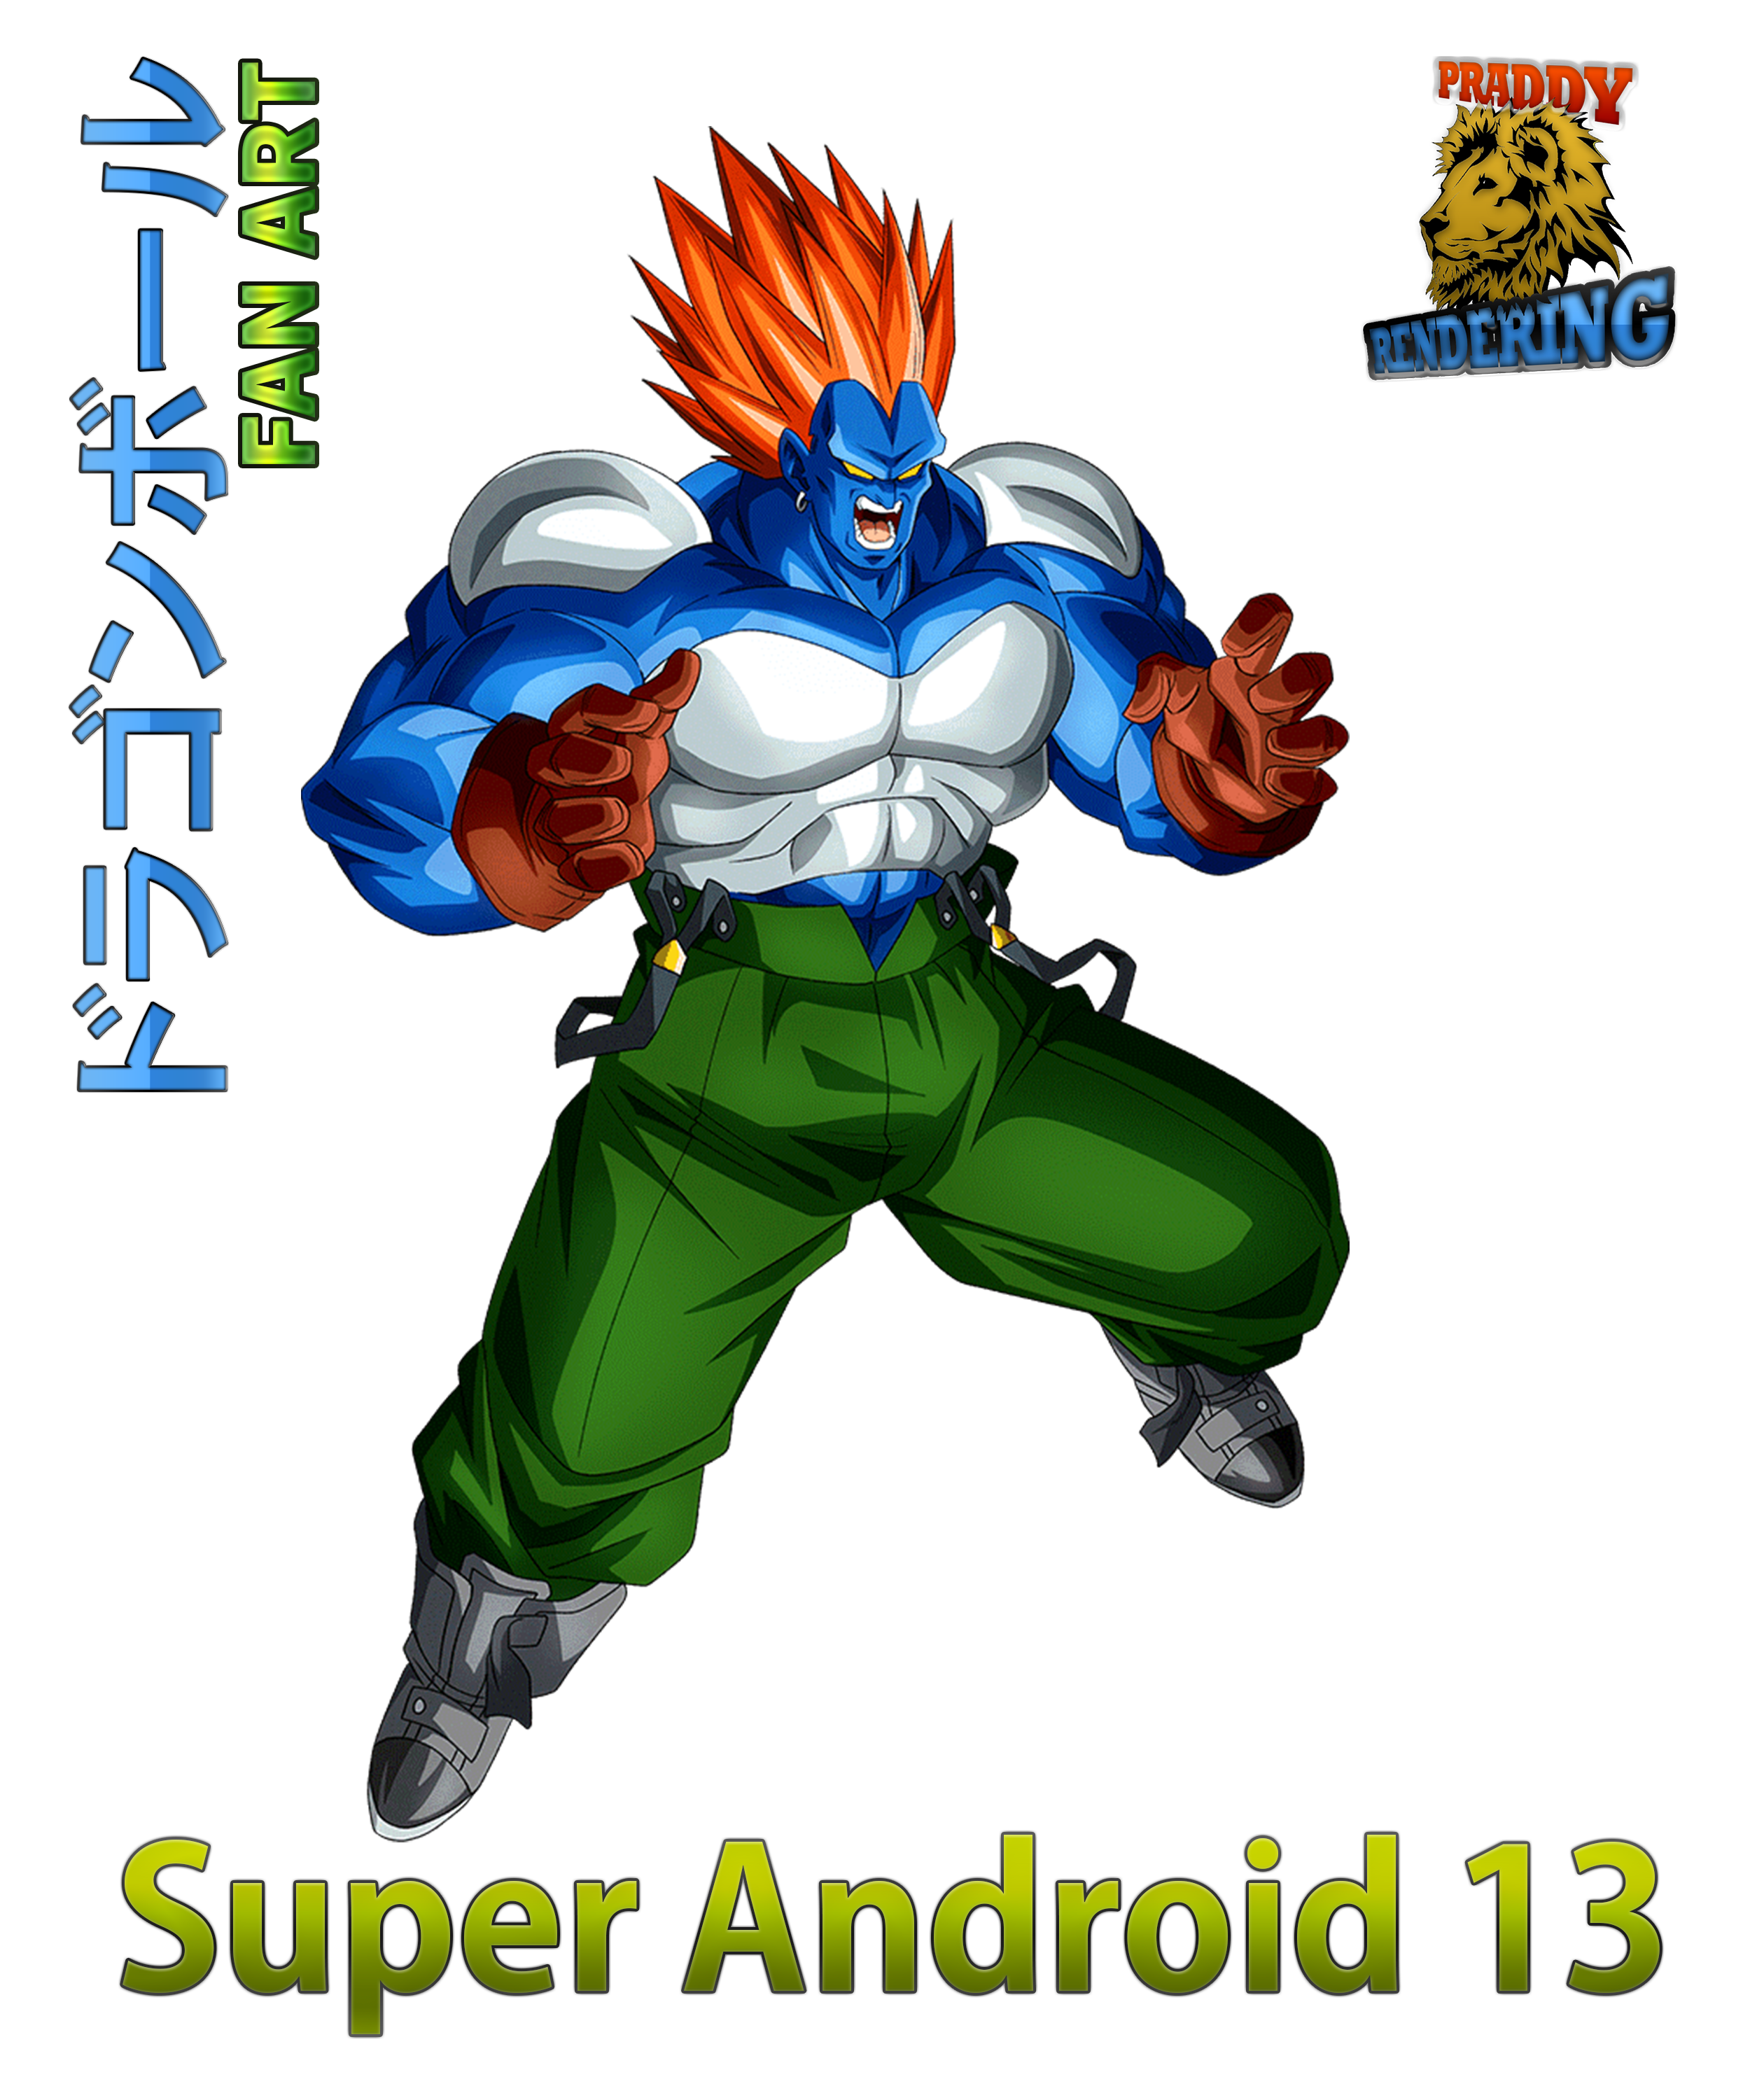 Dragon Ball Z Pelicula 07 Super Android 13 by Pedronex on DeviantArt